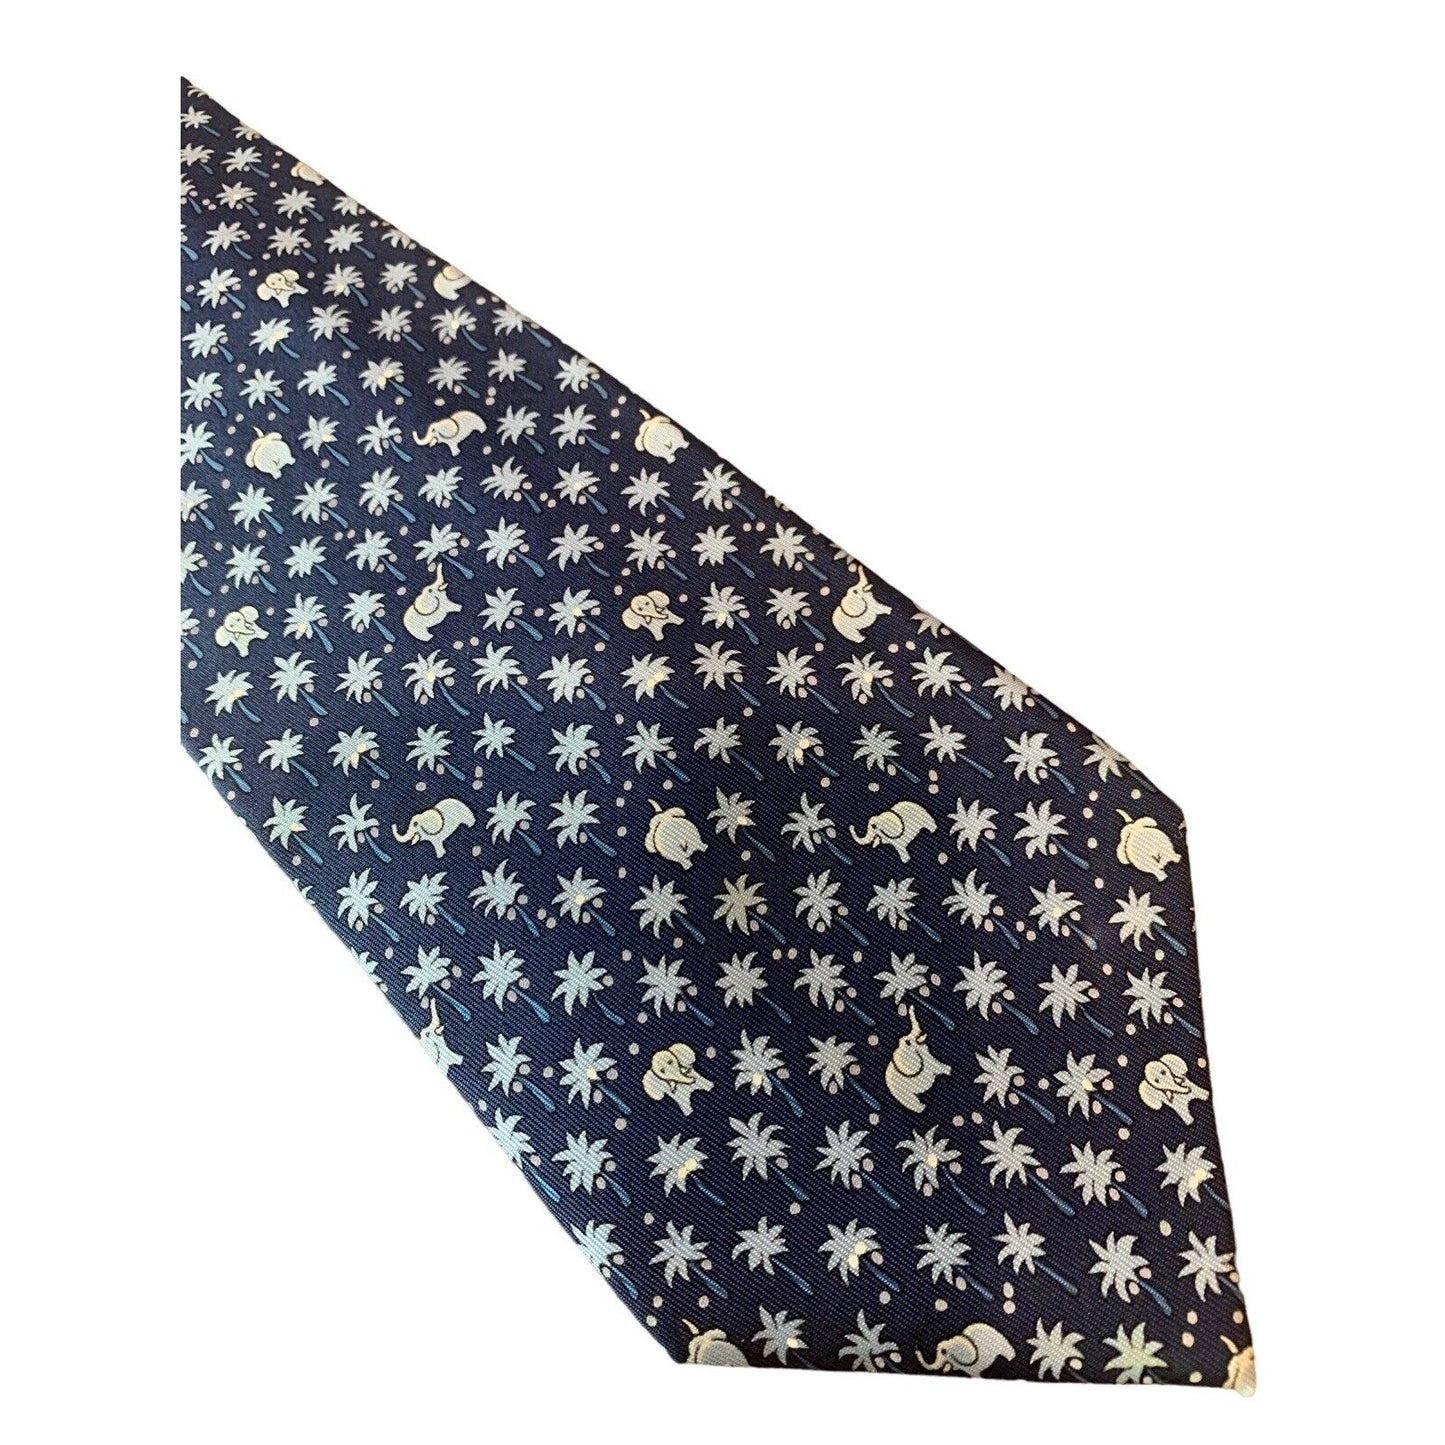 Hermes Men's 9.1cm Classic 100% Silk Tie With Palm Trees and Elephant Print